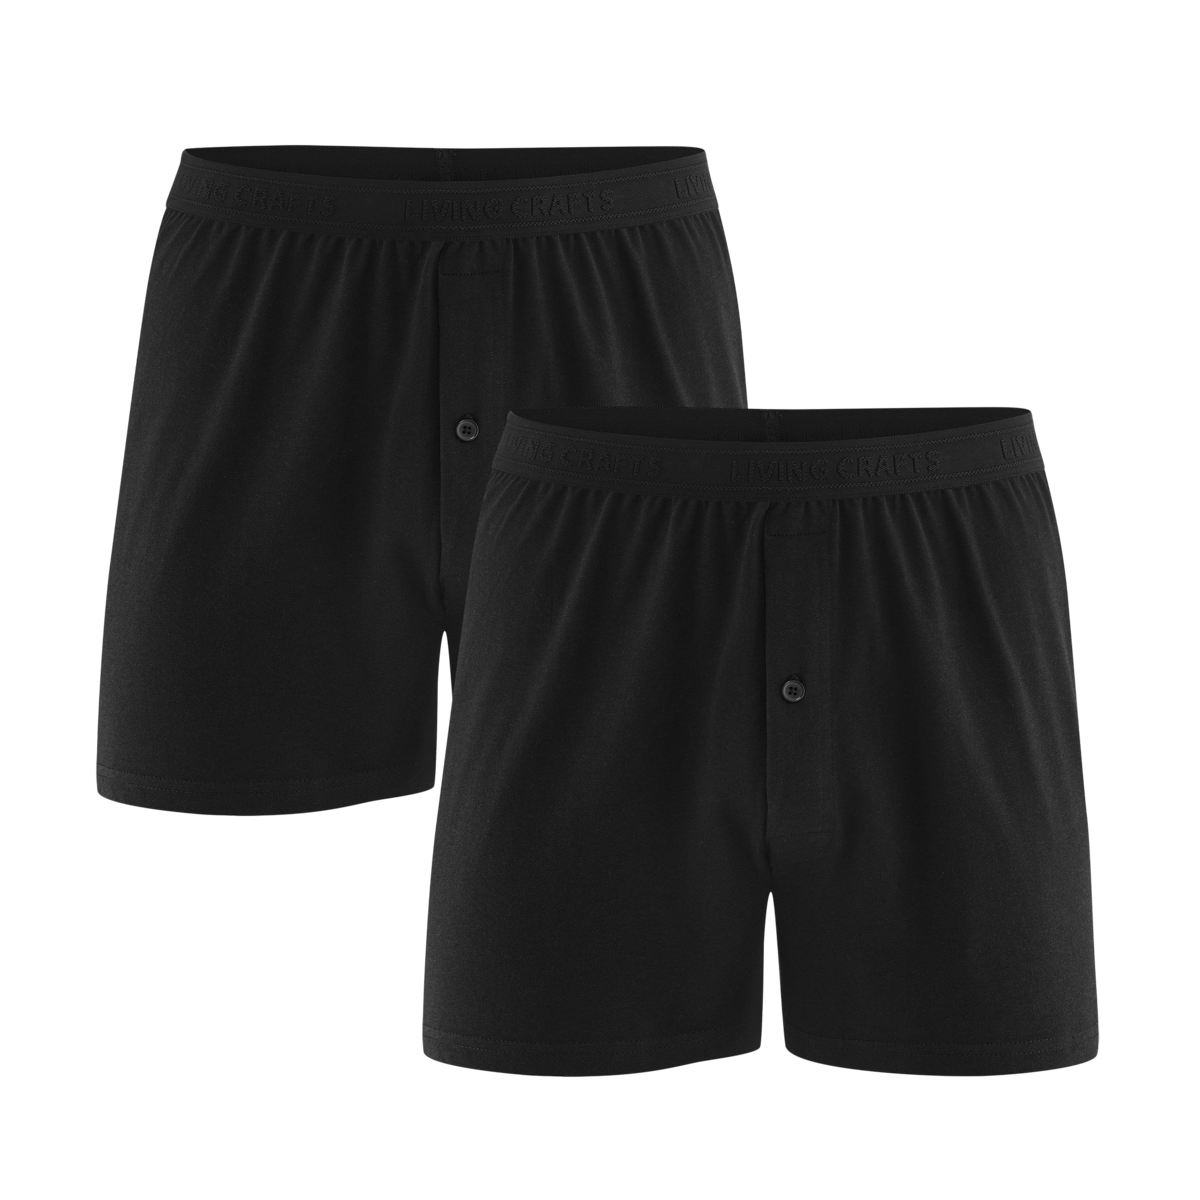 Black Boxer shorts, pack of 2, ETHAN